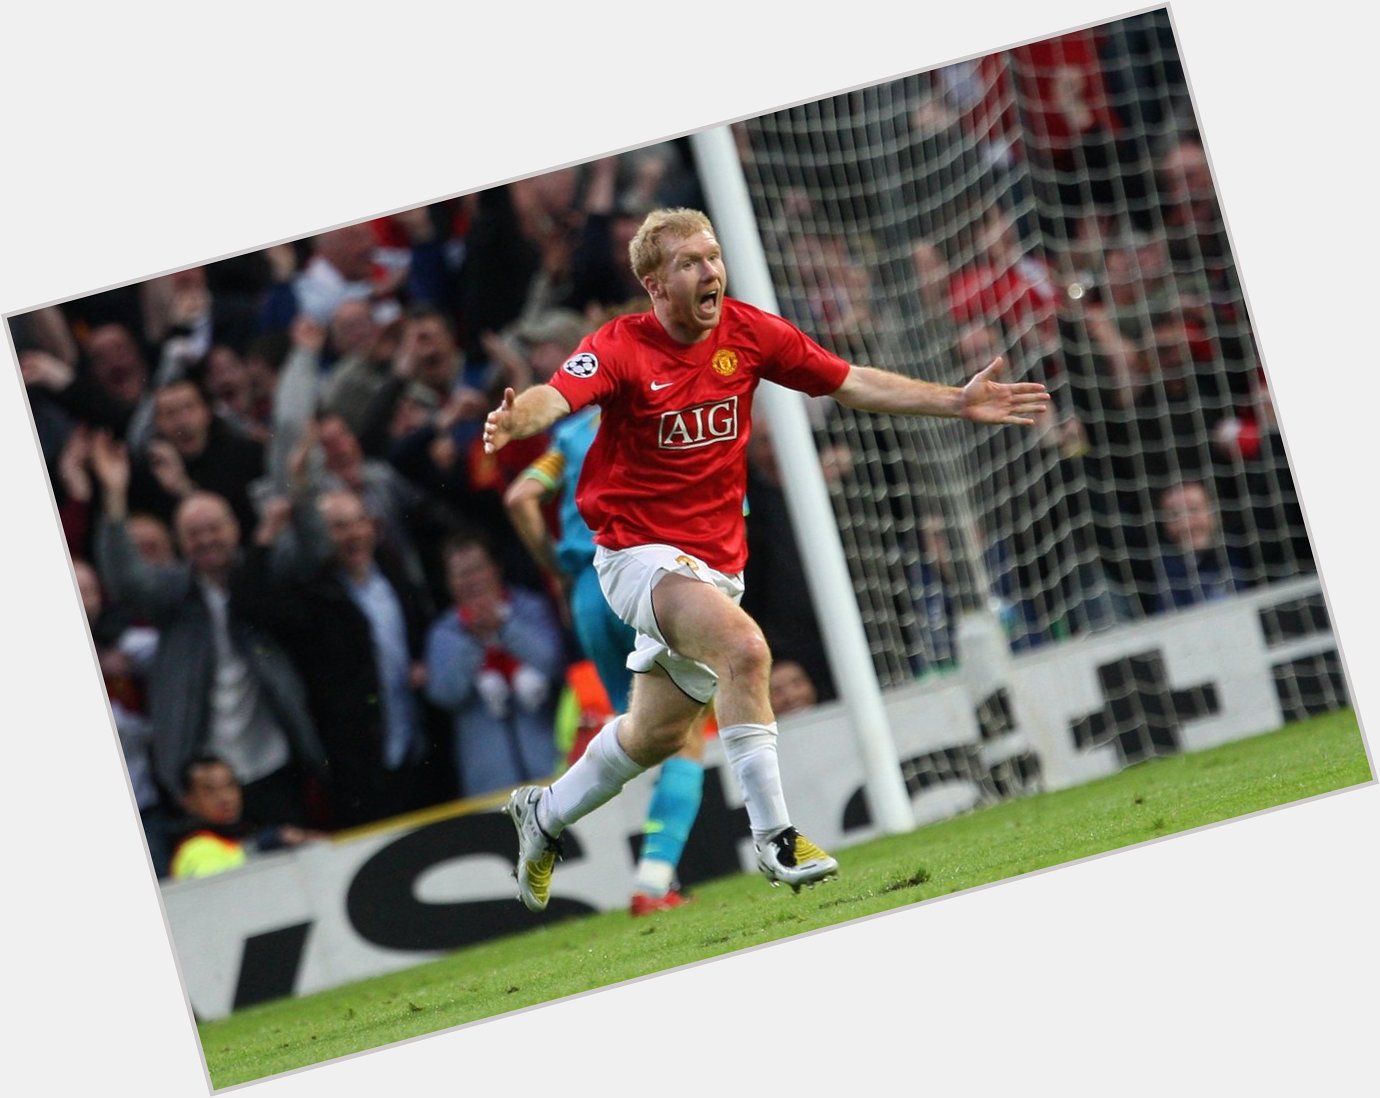 Happy Birthday Paul Scholes! 

What is your favourite Paul Scholes moment in a Manchester United shirt? 